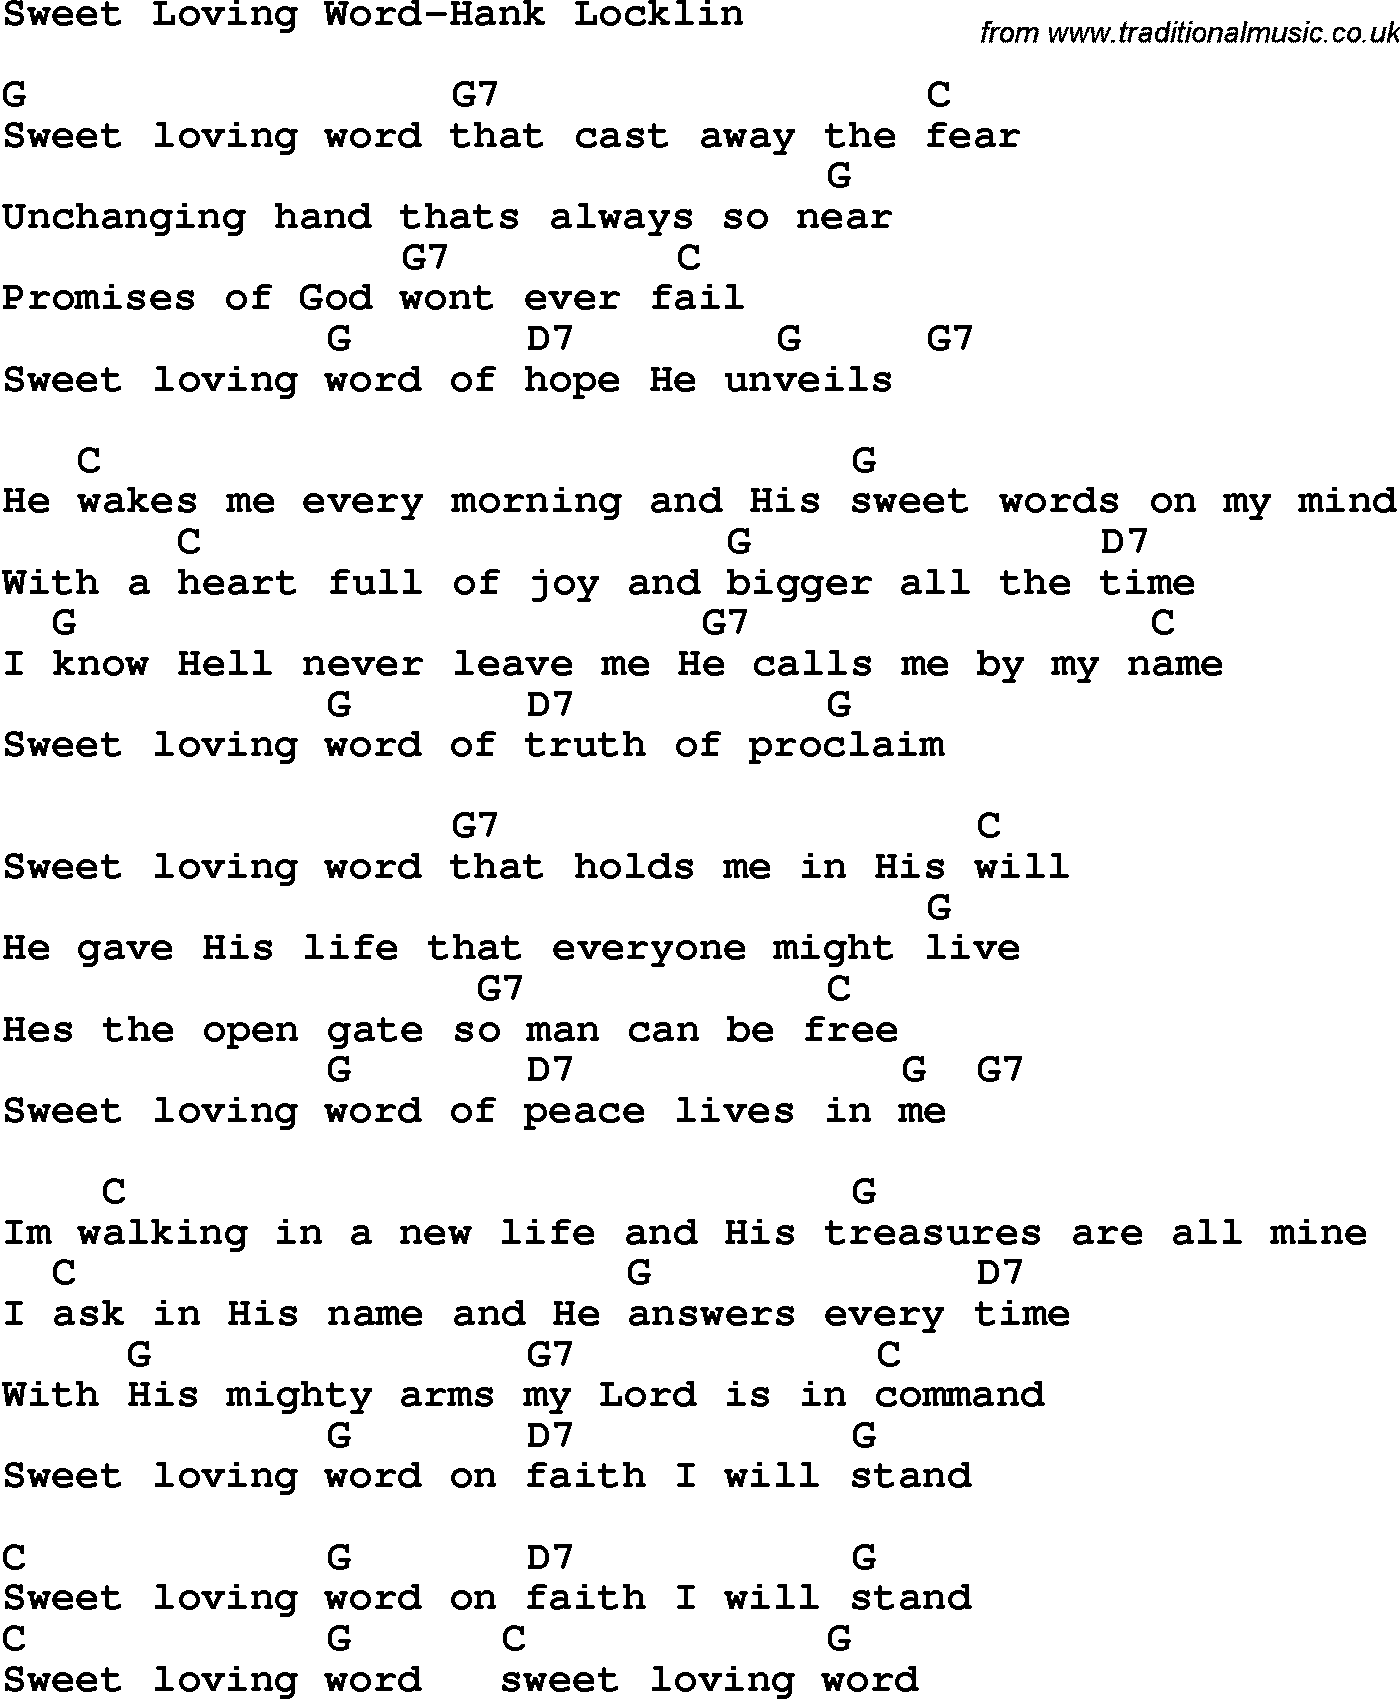 Country, Southern and Bluegrass Gospel Song Sweet Loving Word-Hank Locklin lyrics and chords